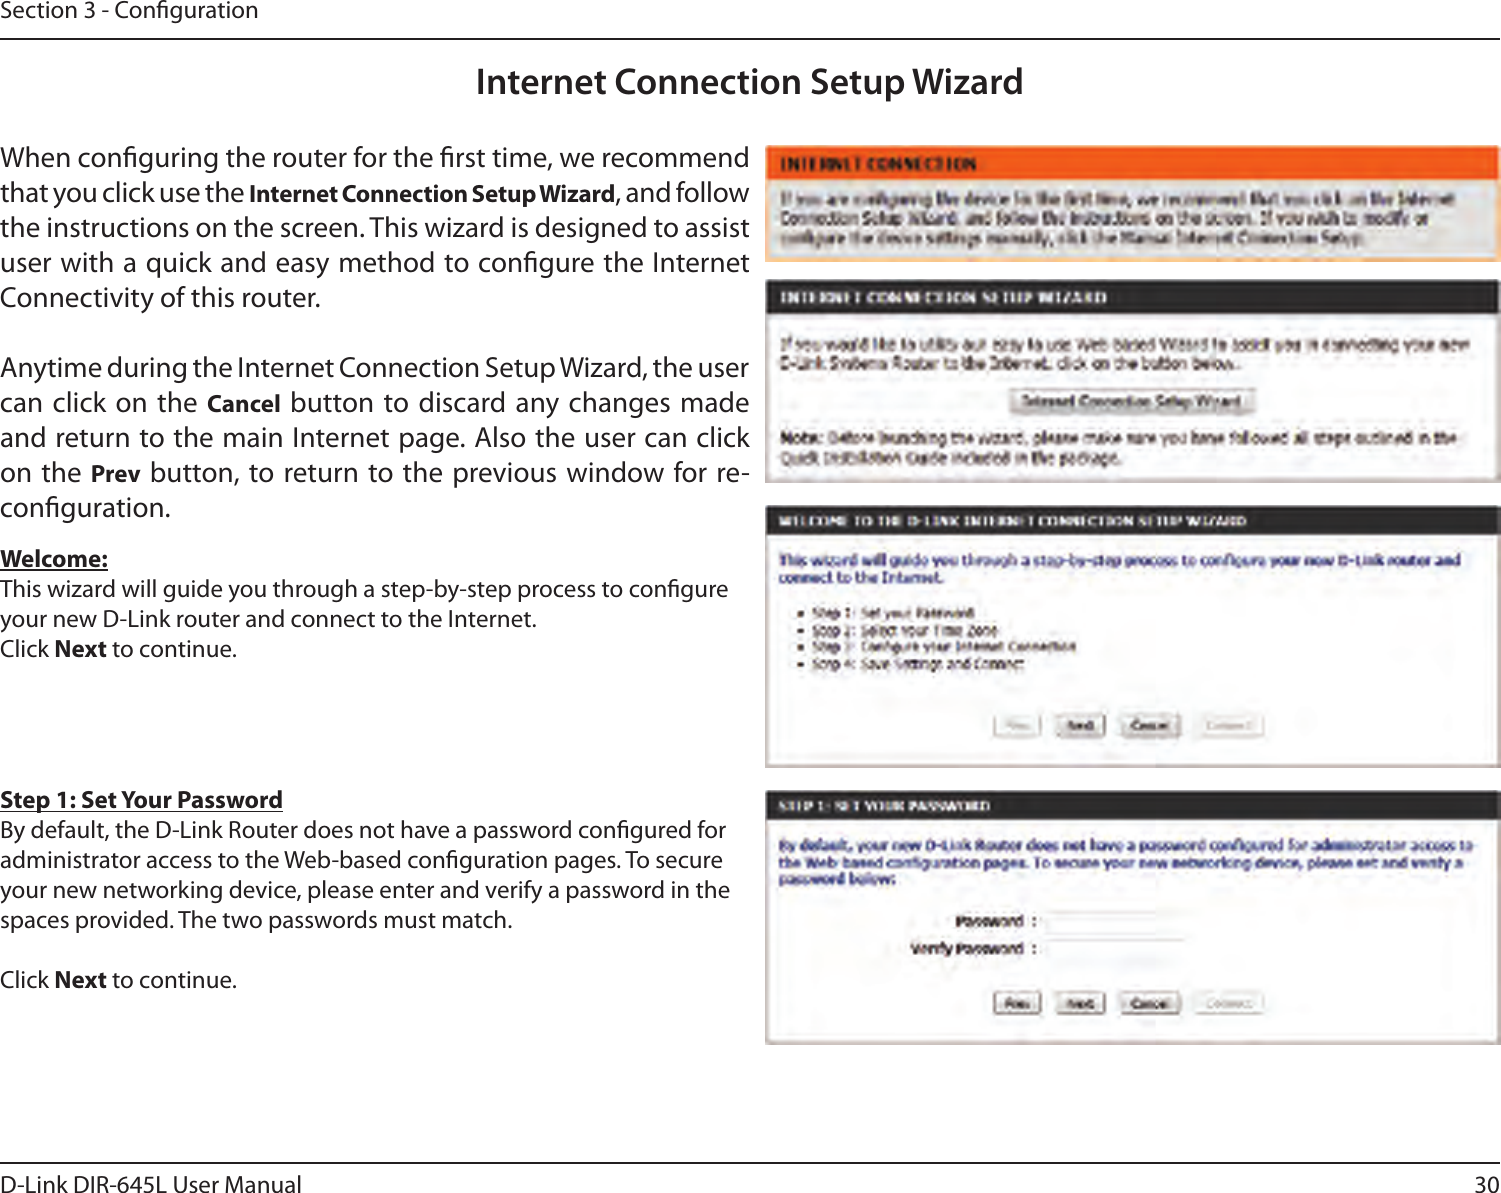 30D-Link DIR-645L User ManualSection 3 - CongurationInternet Connection Setup WizardWhen conguring the router for the rst time, we recommend that you click use the Internet Connection Setup Wizard, and follow the instructions on the screen. This wizard is designed to assist user with a quick and easy method to congure the Internet Connectivity of this router.Anytime during the Internet Connection Setup Wizard, the user can click on the Cancel button to discard any changes made and return to the main Internet page. Also the user can click on the Prev button, to return to the previous window for re-conguration.Welcome:This wizard will guide you through a step-by-step process to congure your new D-Link router and connect to the Internet. Click Next to continue.Step 1: Set Your PasswordBy default, the D-Link Router does not have a password congured for administrator access to the Web-based conguration pages. To secure your new networking device, please enter and verify a password in the spaces provided. The two passwords must match.Click Next to continue.